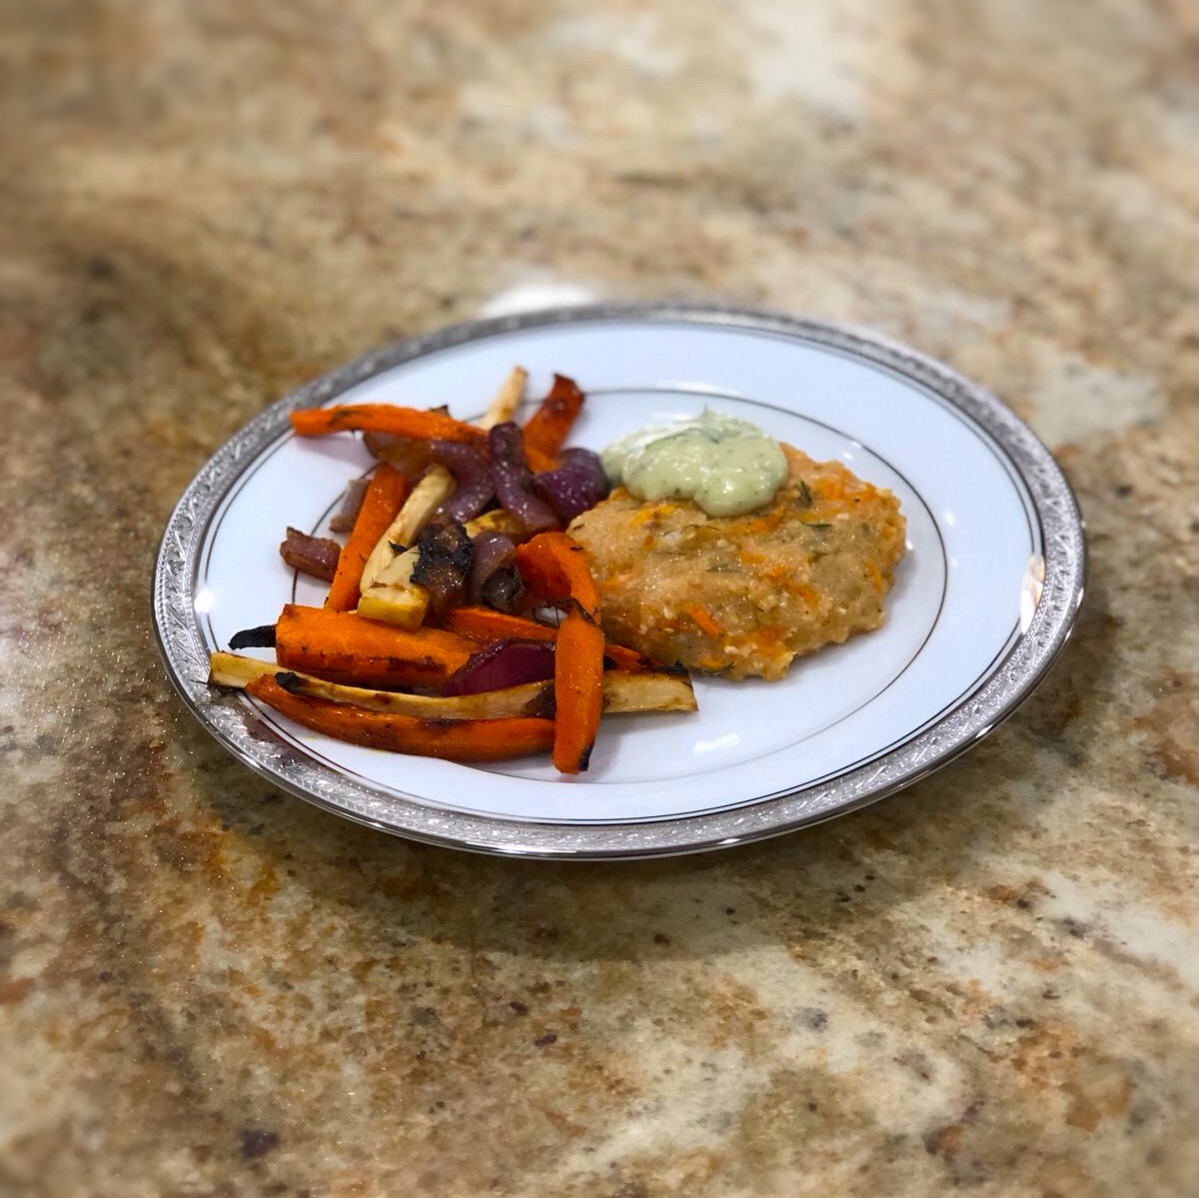 Salmon-Gefilte Fish Patties With Caramelized Carrot & Parsnip Spears